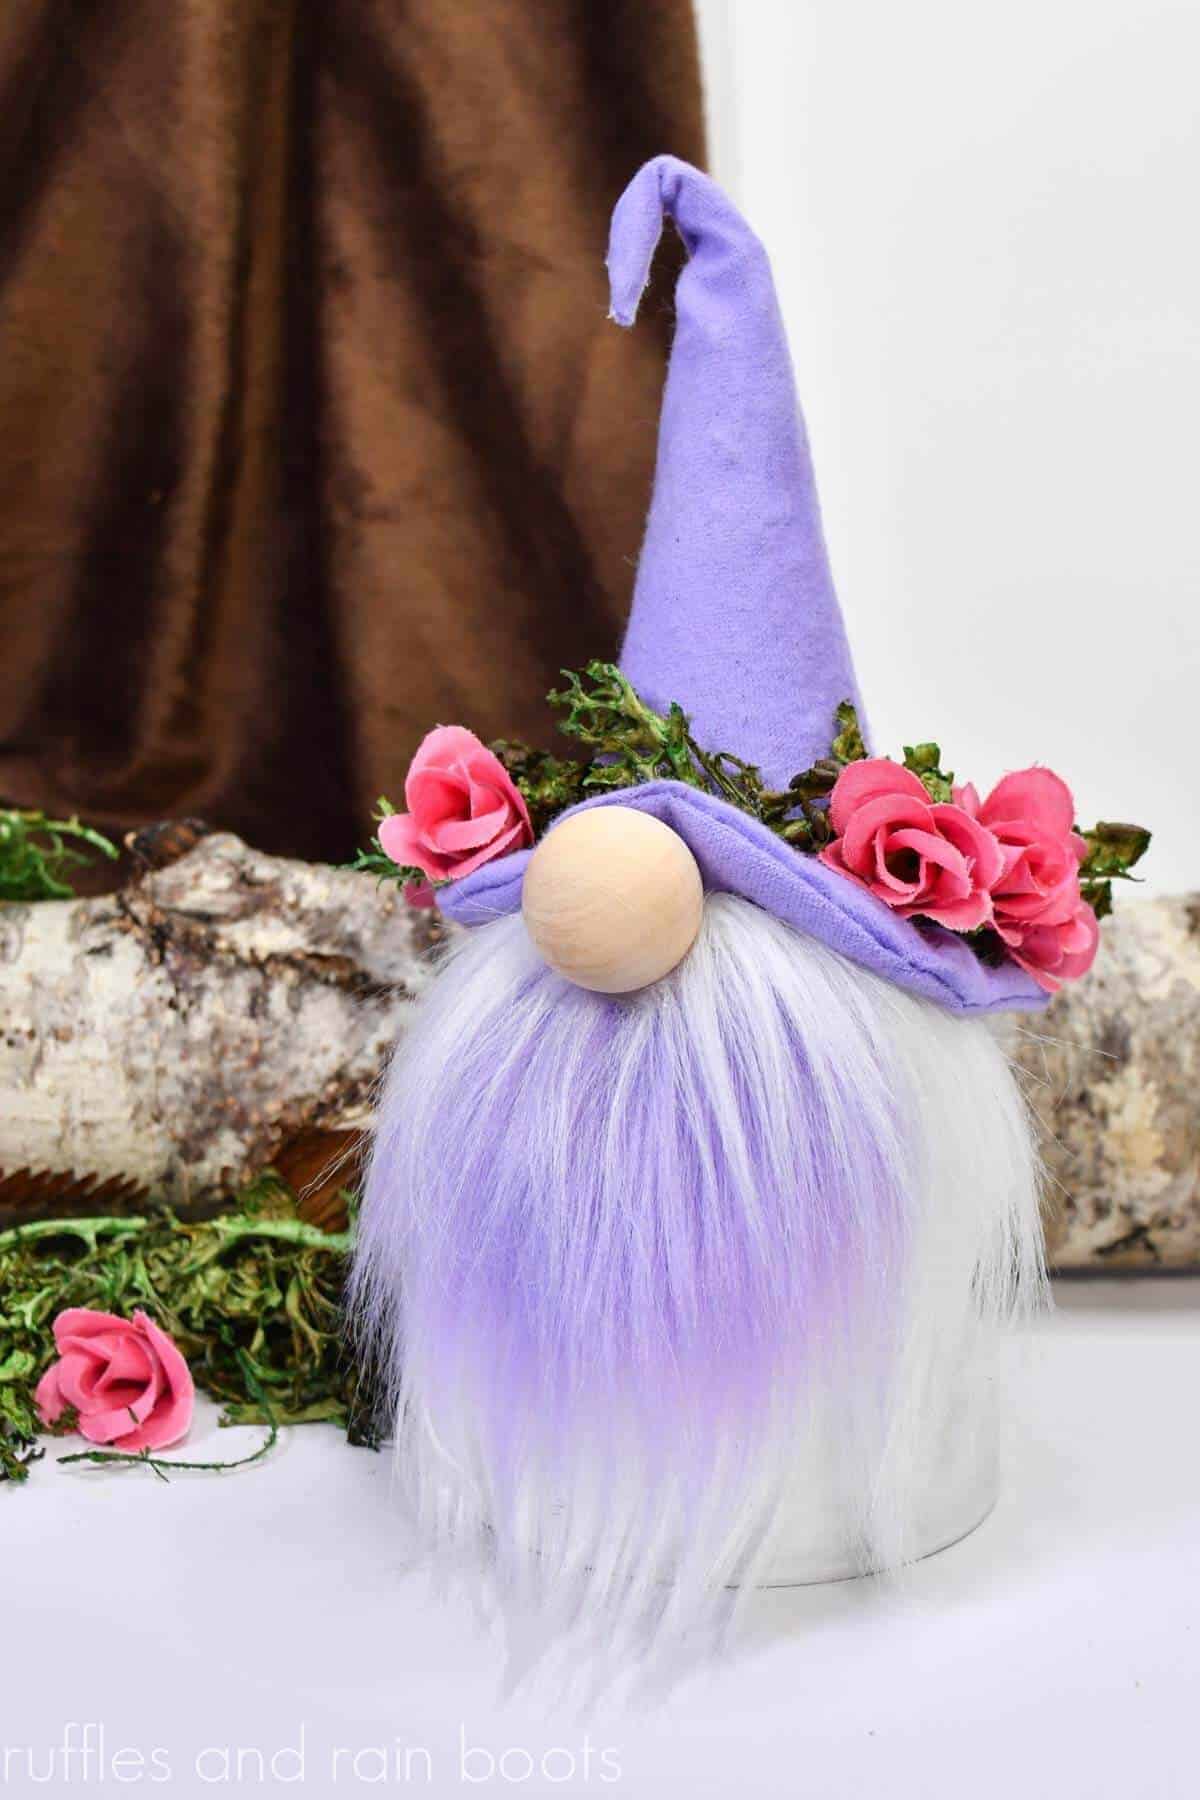 Vertical image of white gnome beard with purple heart inset showing how to color faux fur so it stays colored.